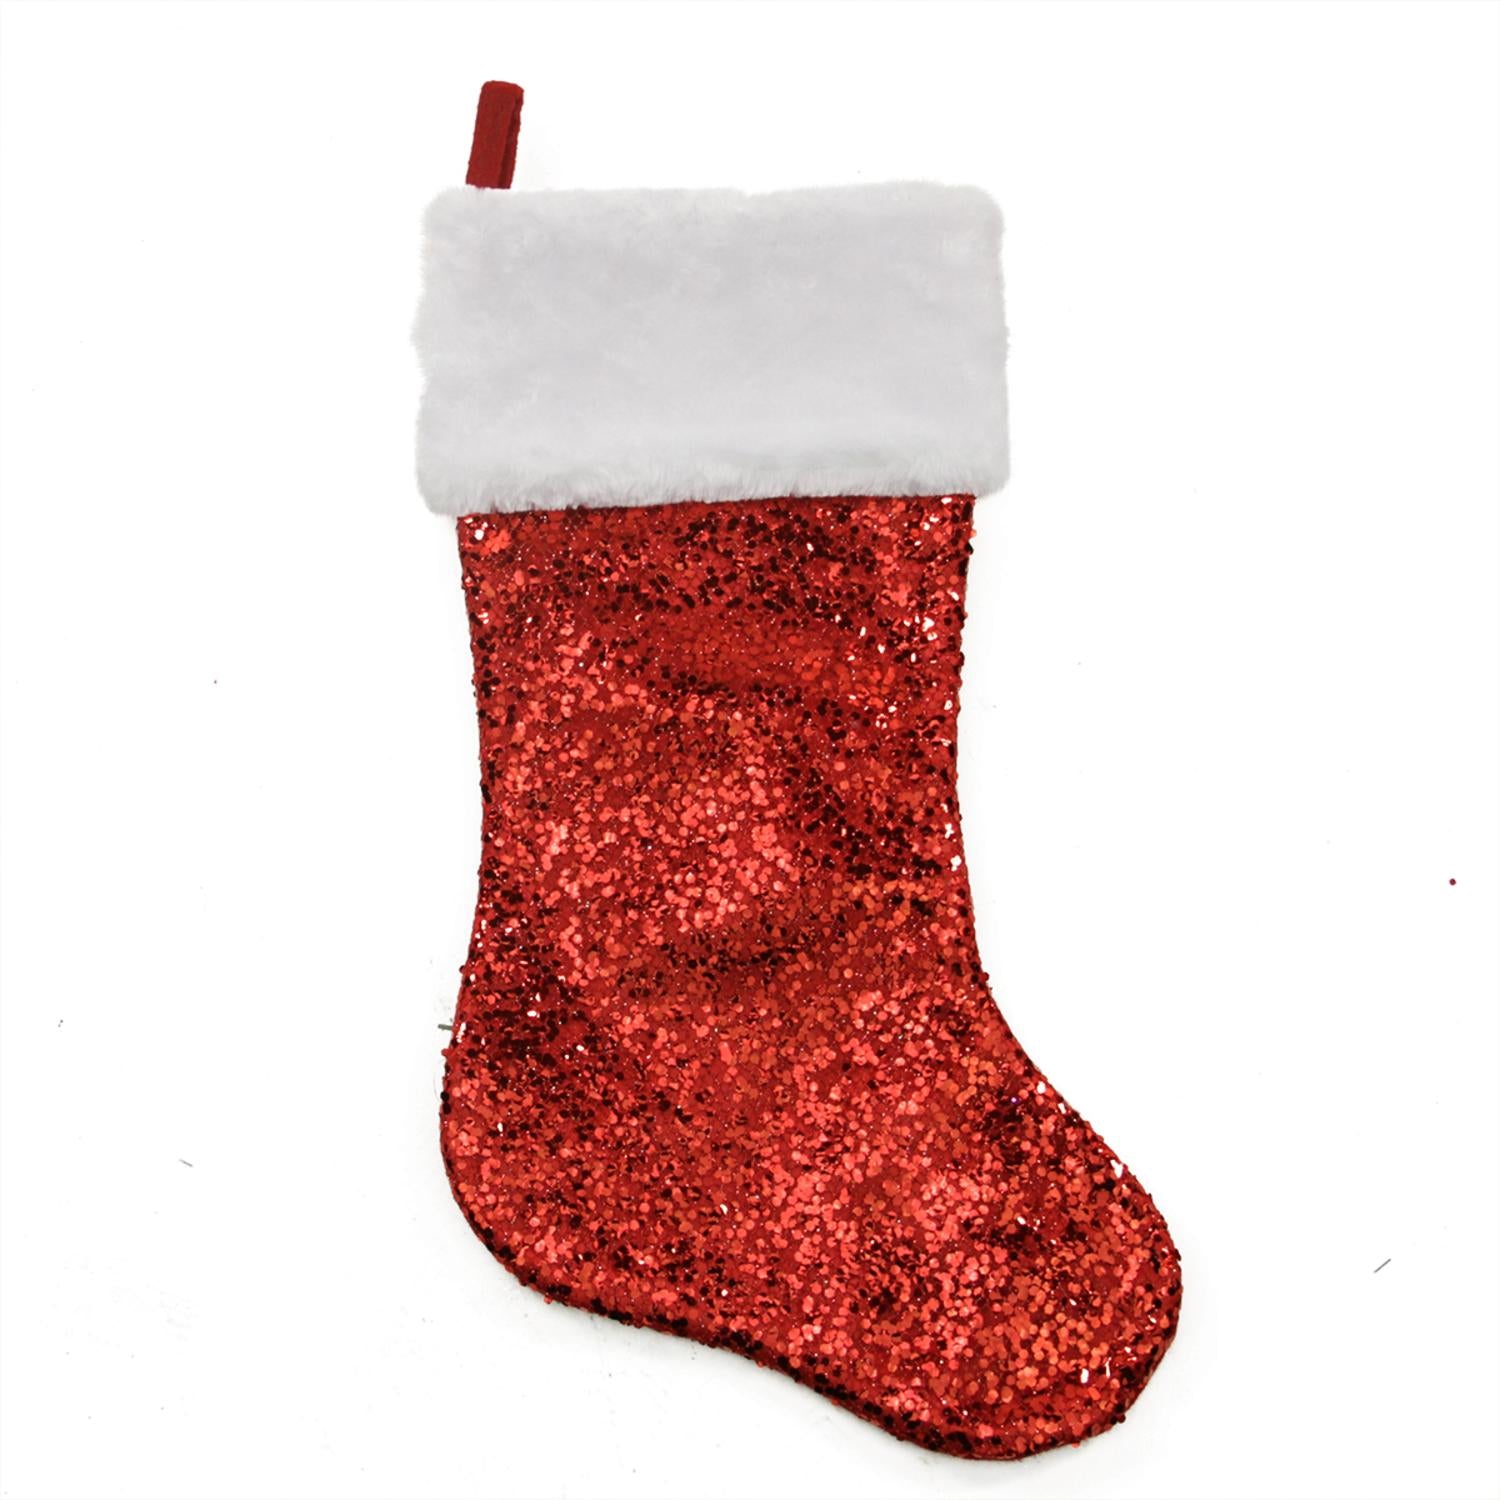 20" Shiny Red Holographic Sequined Christmas Stocking with White Faux Fur Cuff